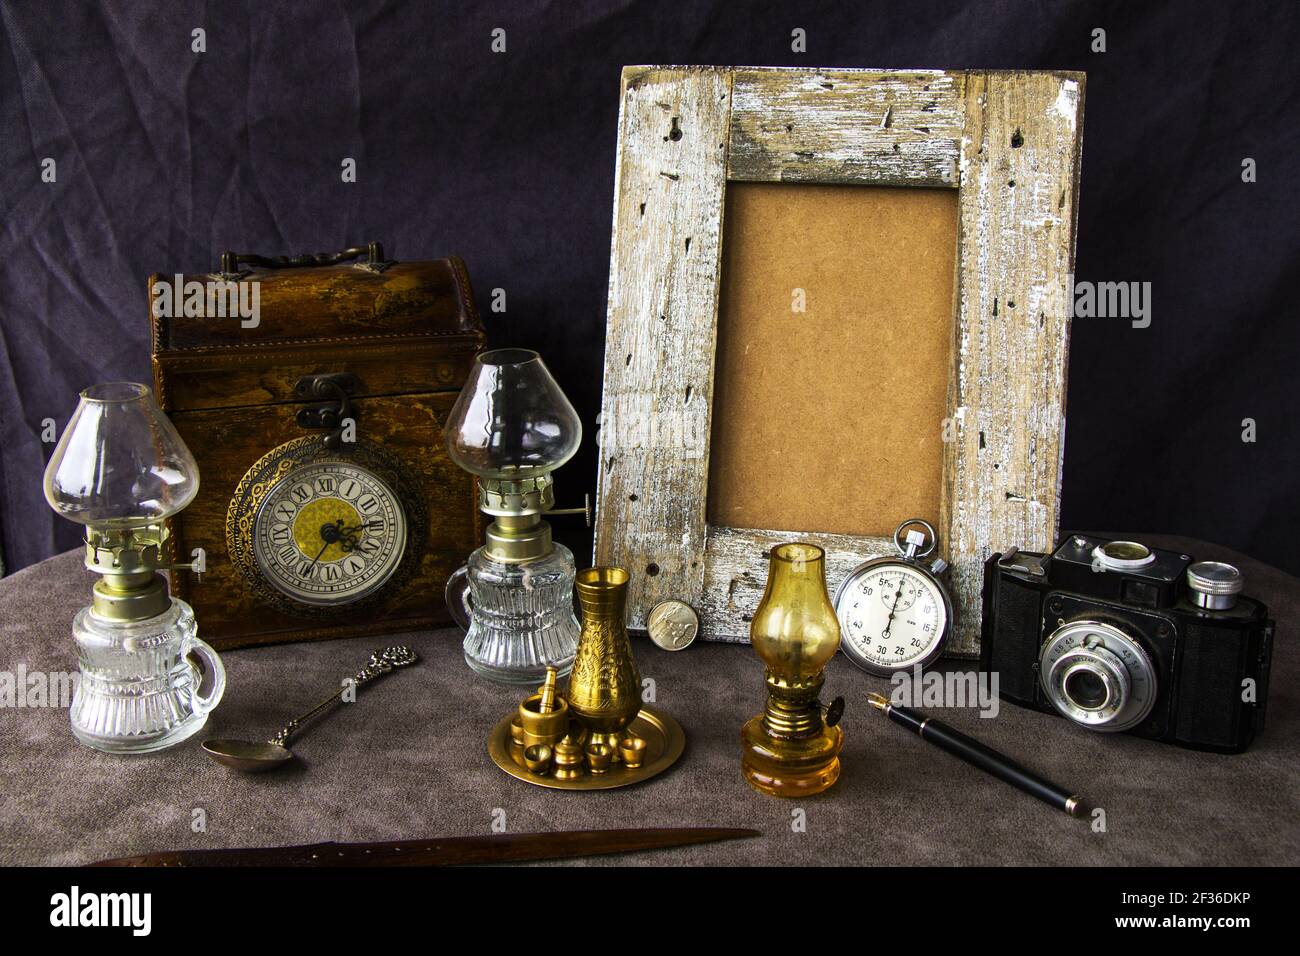 The vintage objects on the table, old box, lamp, clock, pen, and other things Stock Photo